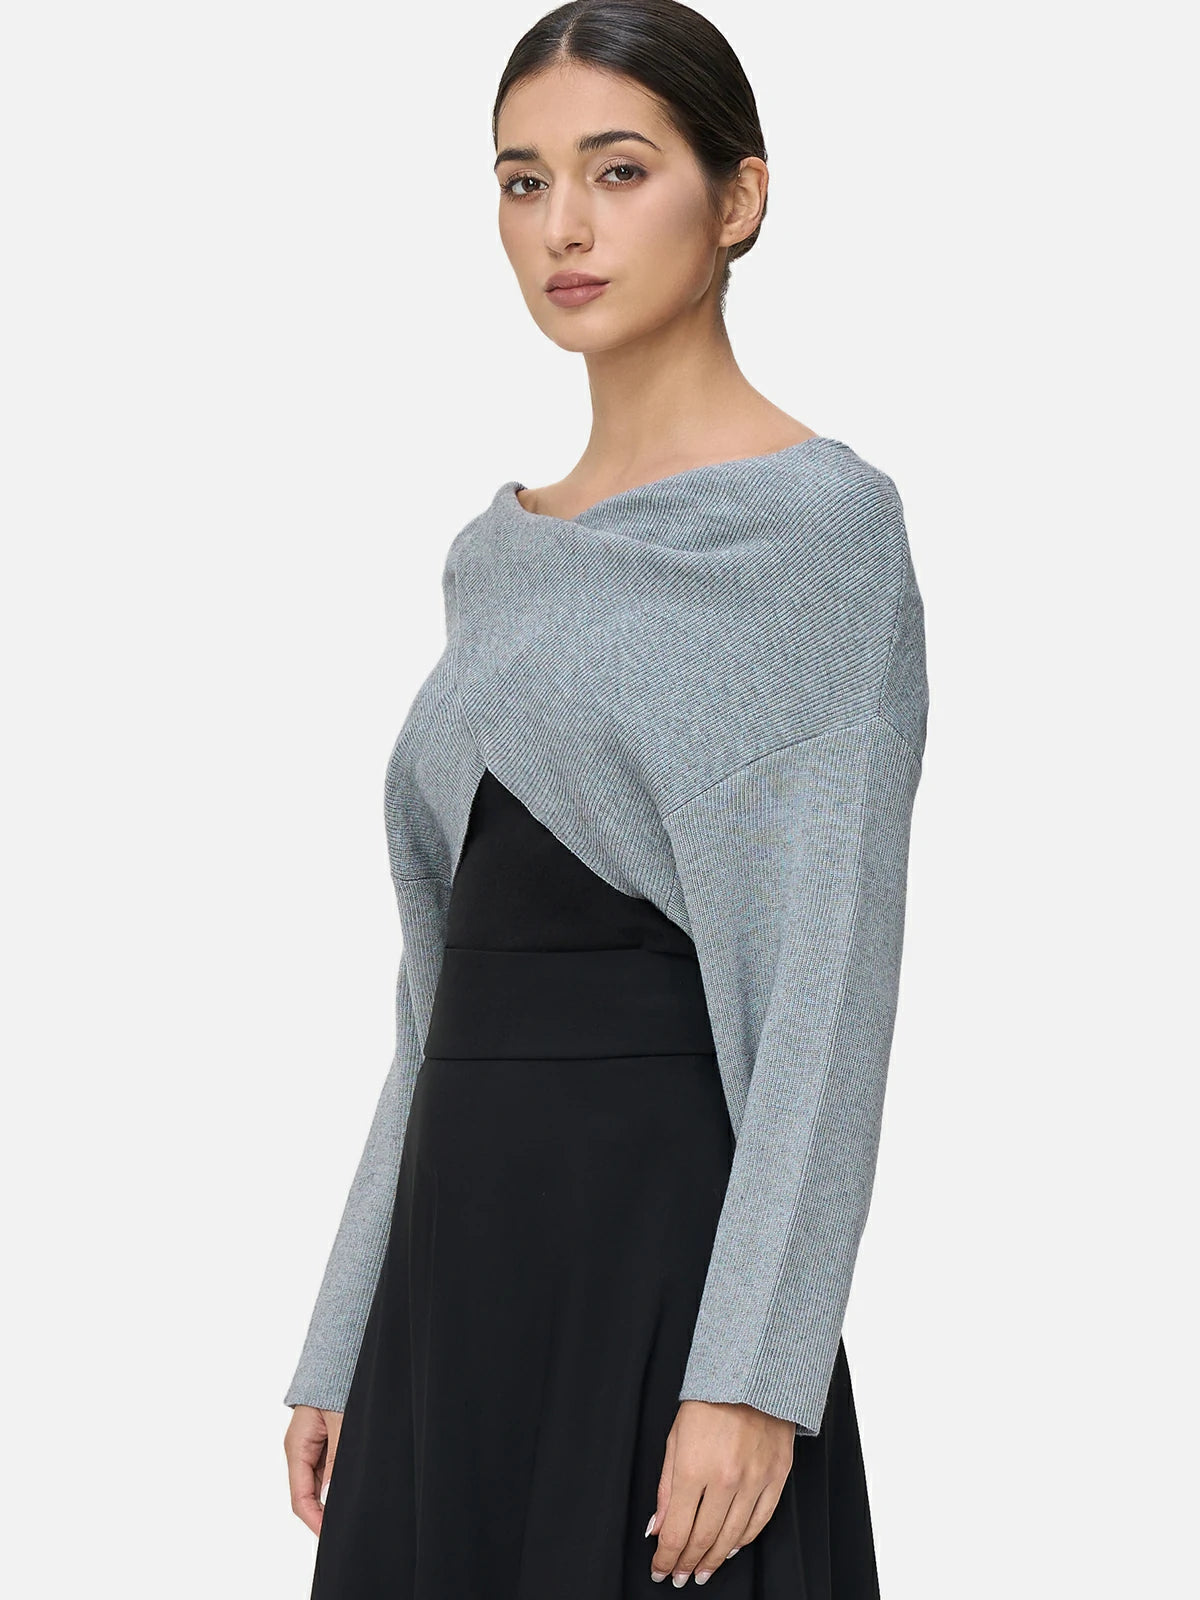 Fashion-Forward Statement: Make a fashion-forward statement with this unique knit sweater.